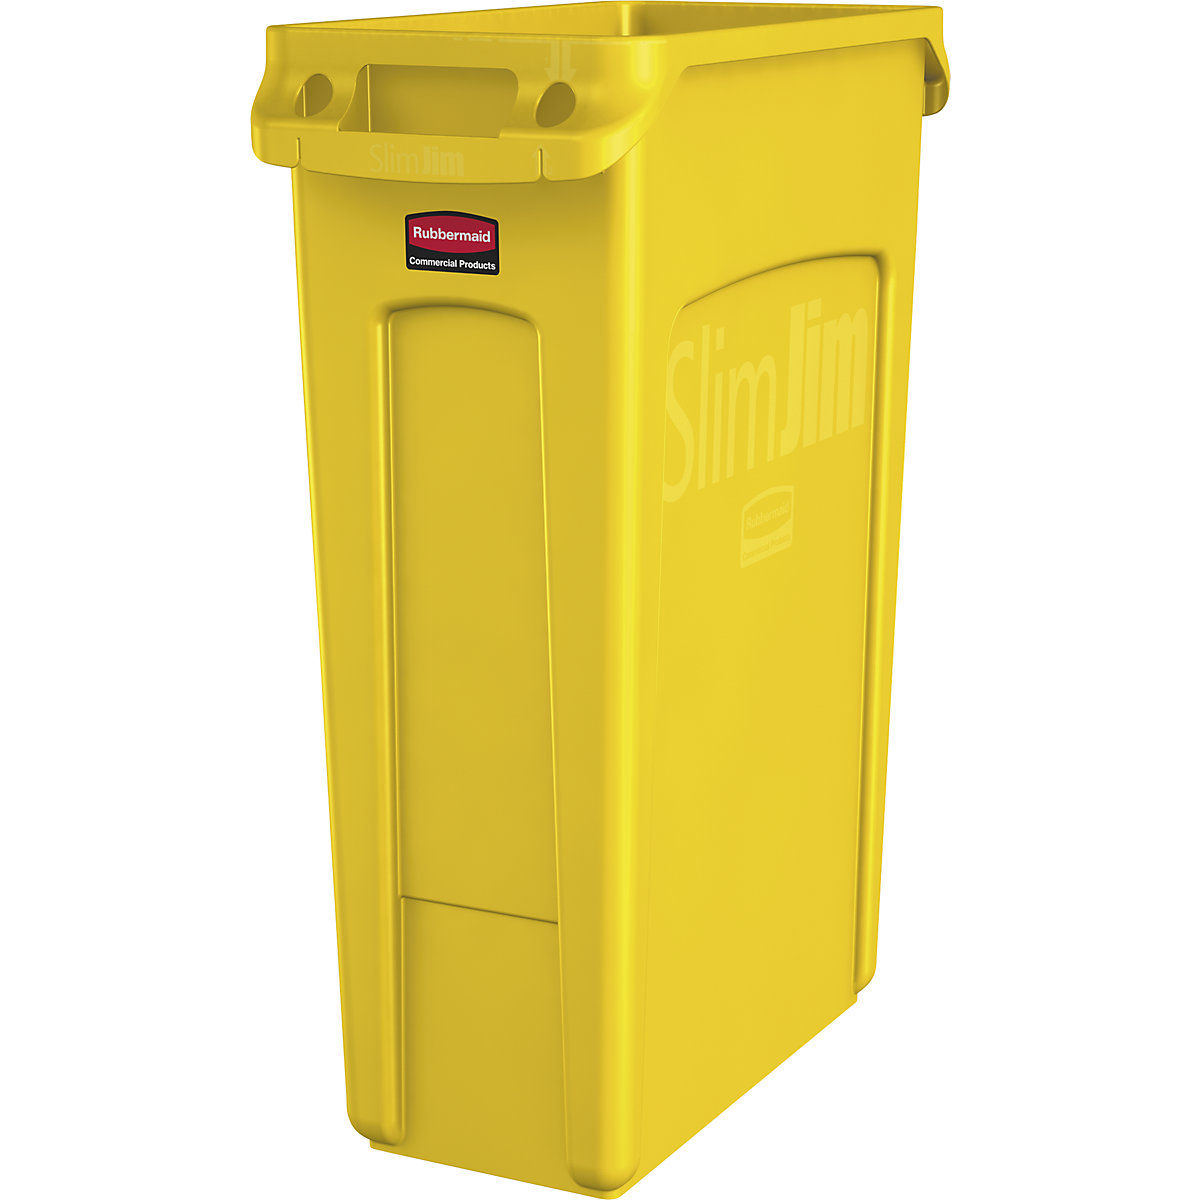 SLIM JIM® recyclable waste collector/waste bin – Rubbermaid, capacity 87 l, with ventilation ducts, yellow, 10+ items-14